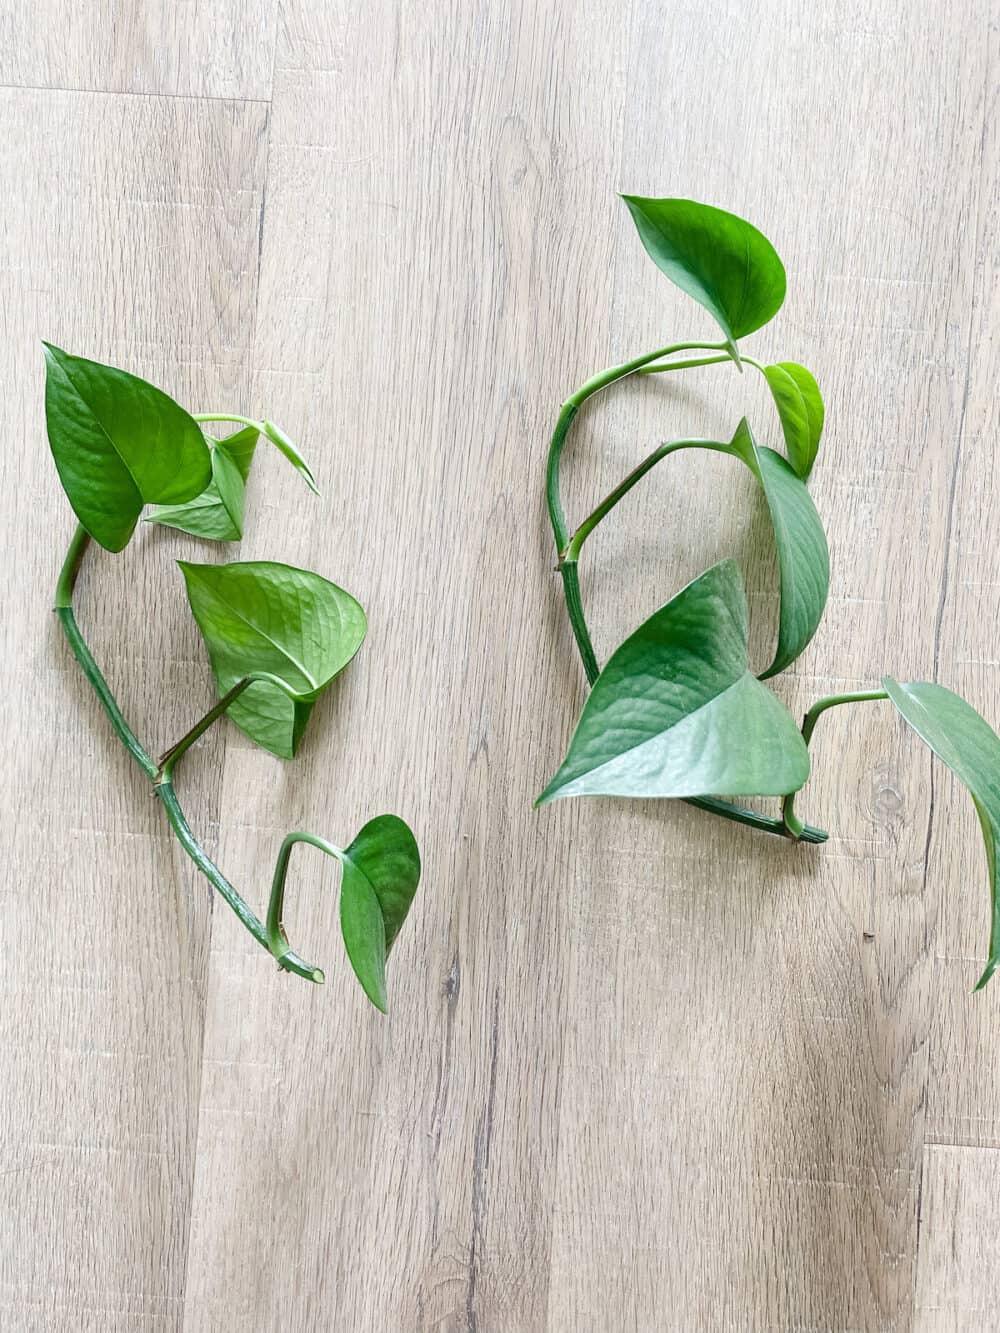 Two pothos plant clippings to be propagated